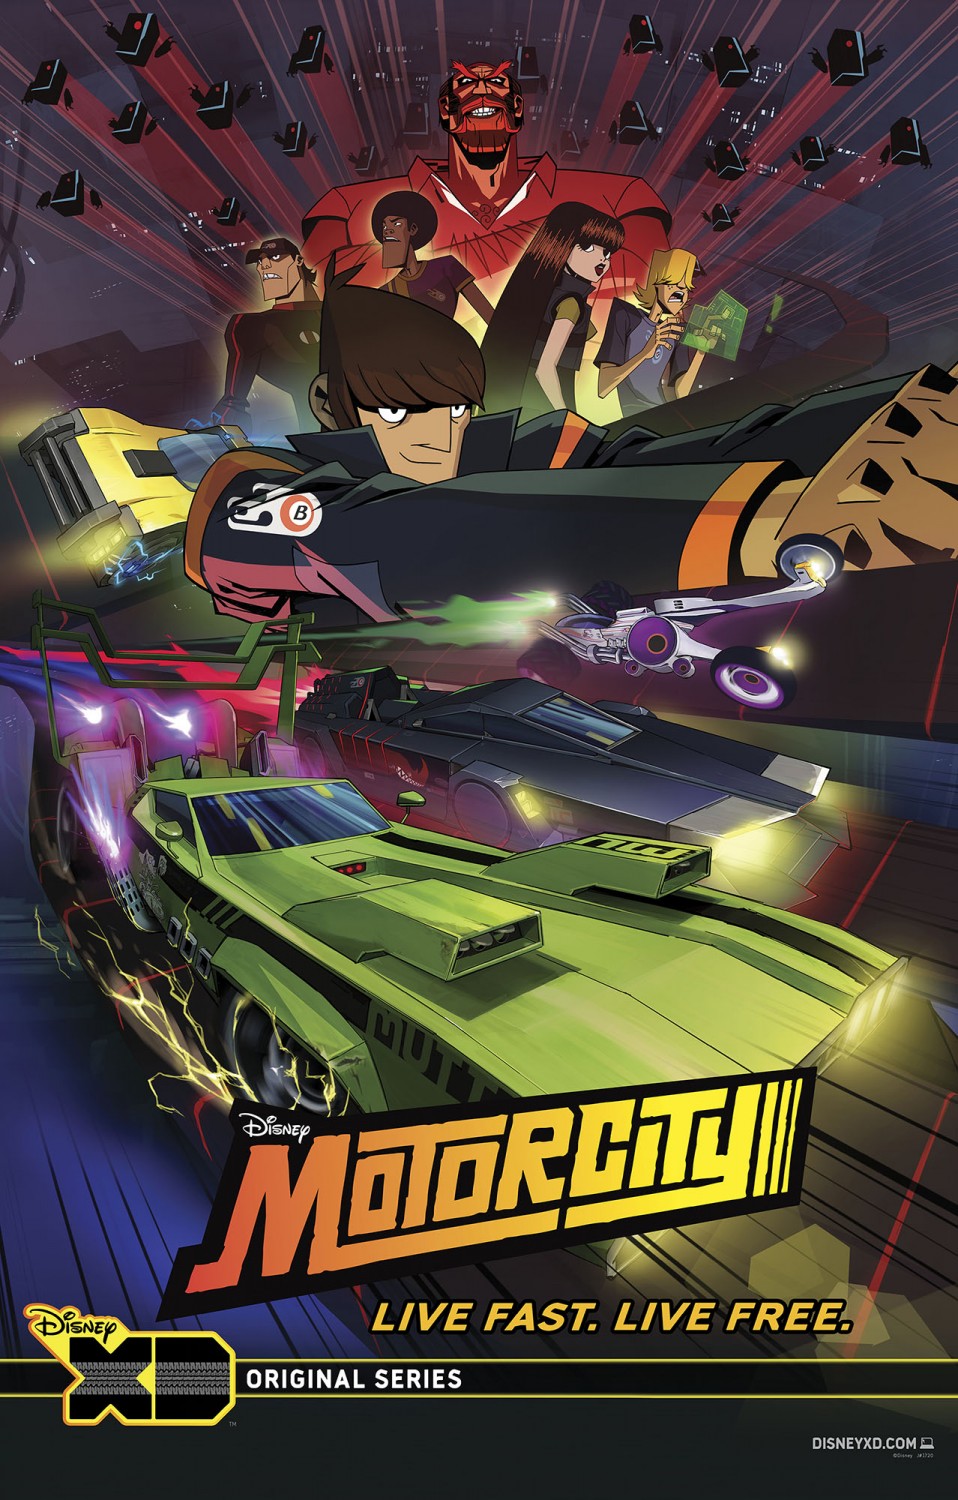 Extra Large TV Poster Image for Motorcity 